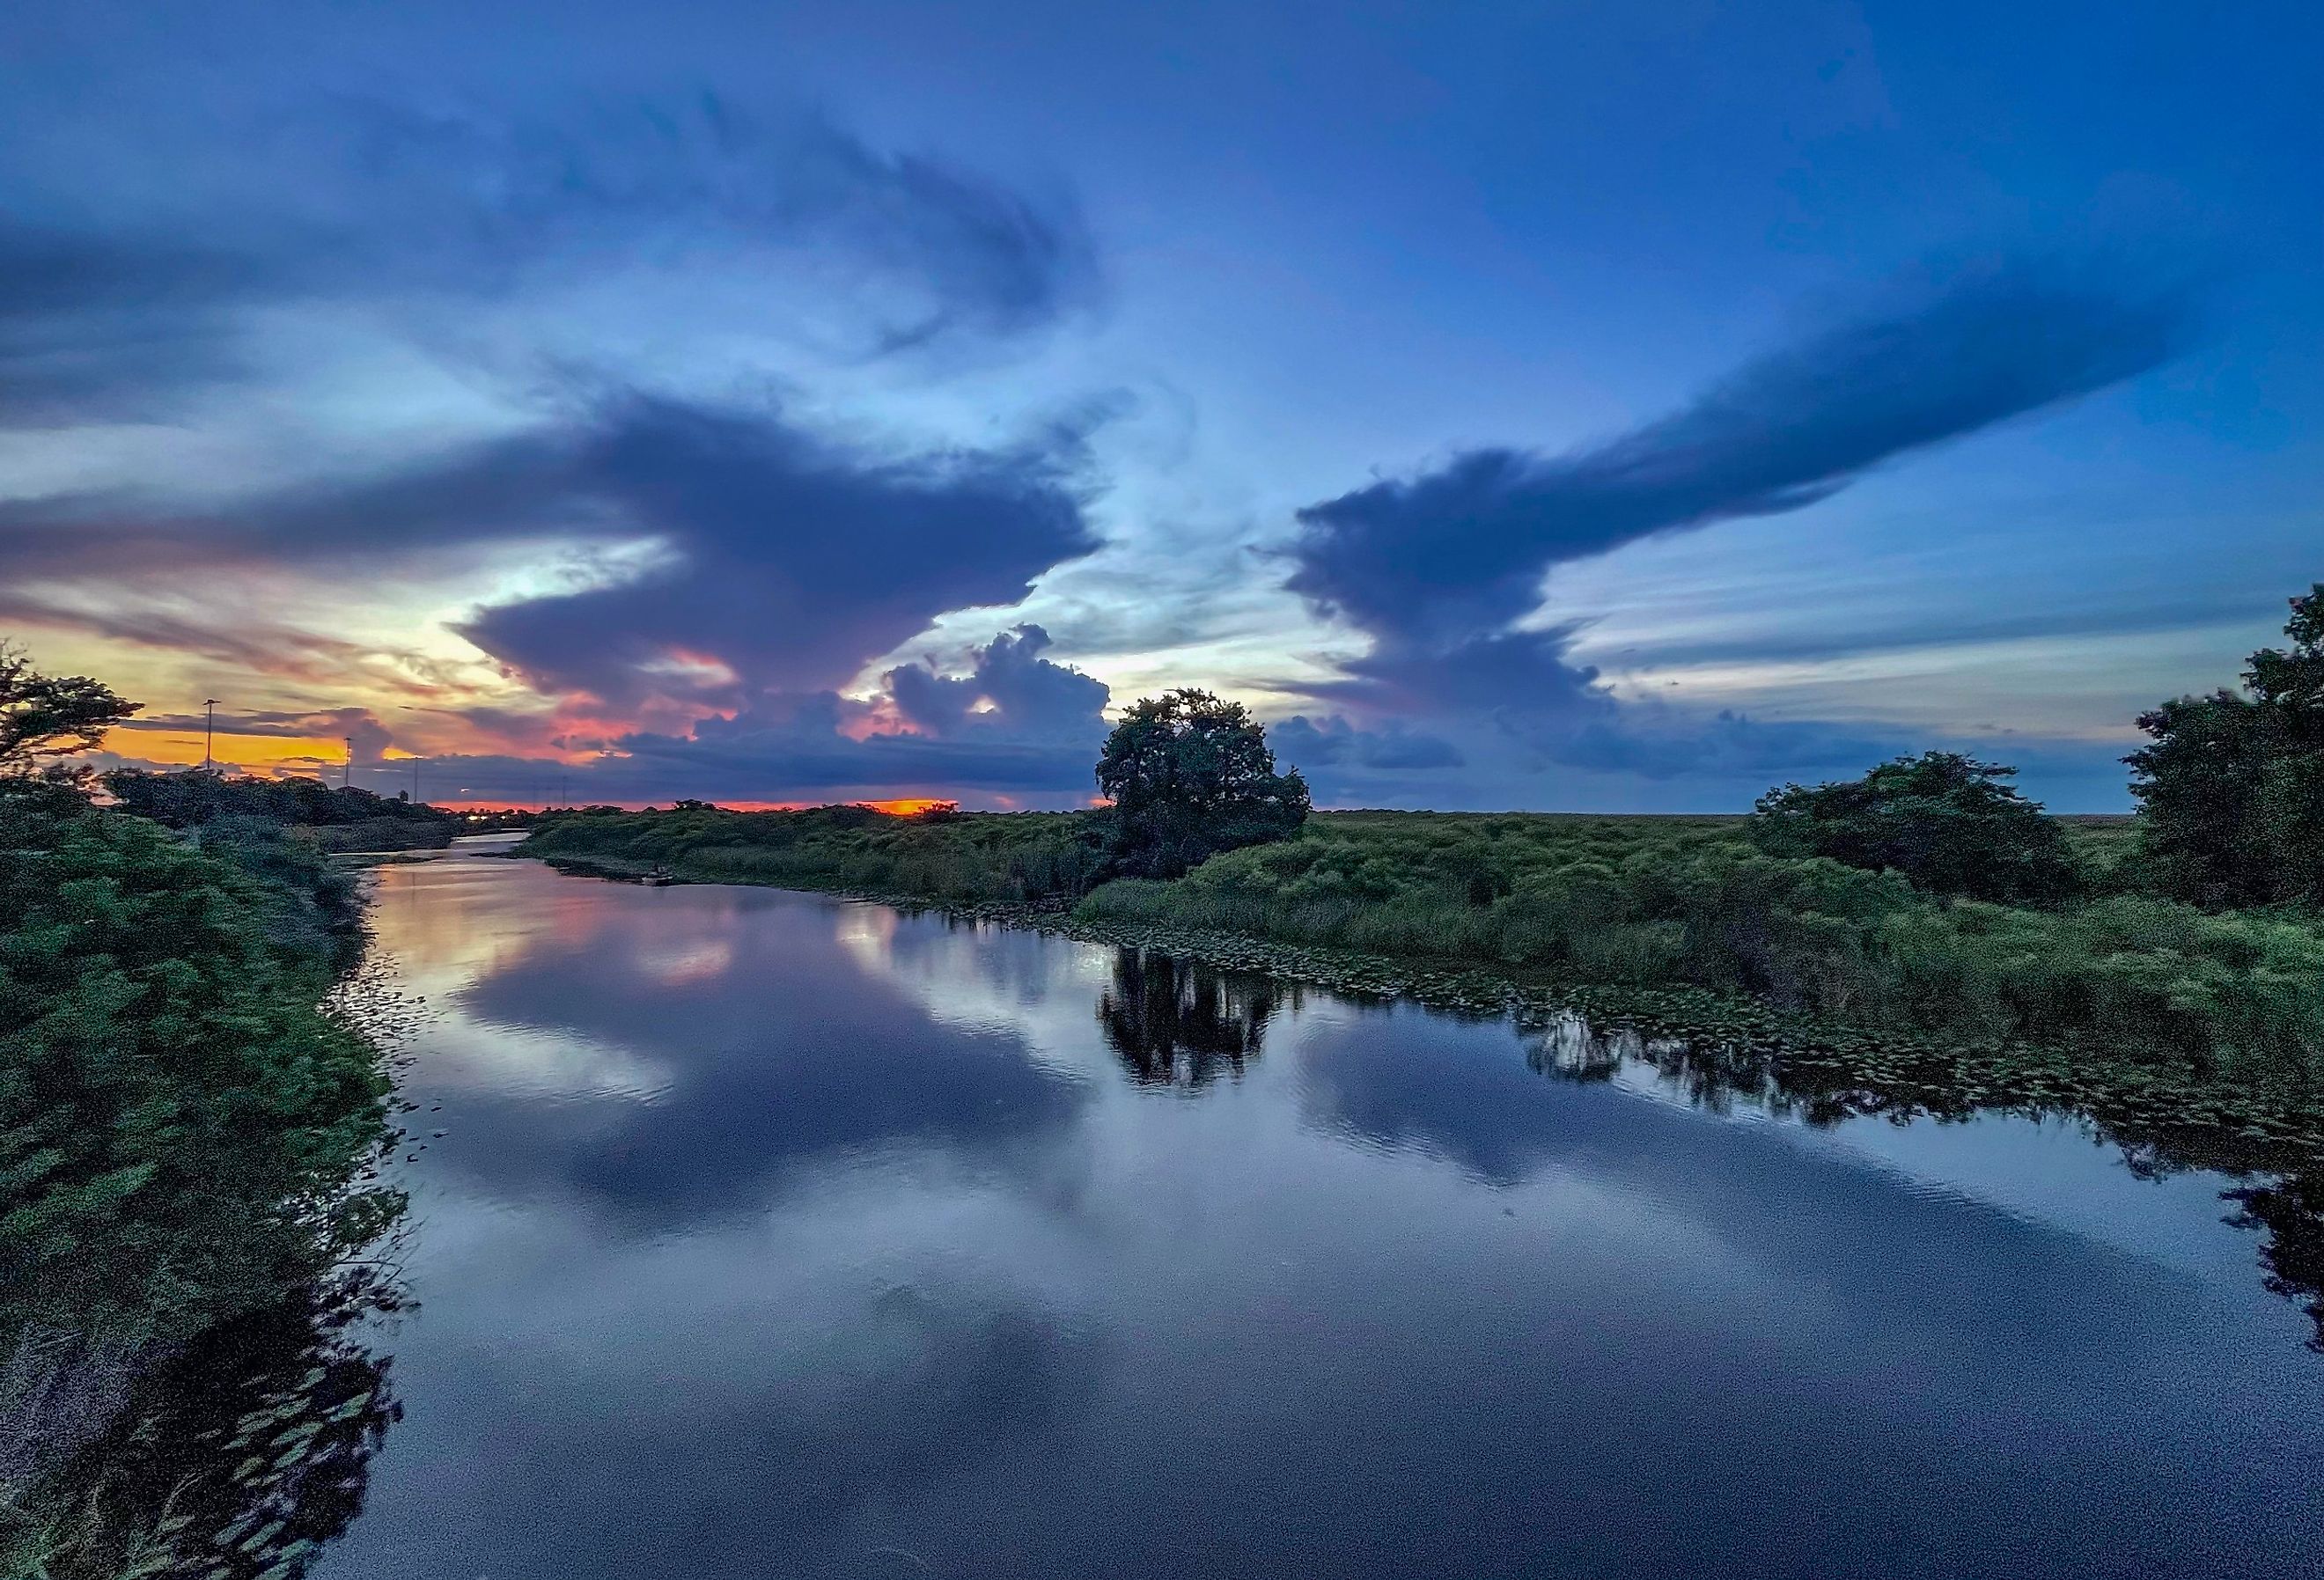 Swamp sunset and hurricane clouds in Covington, Louisiana.